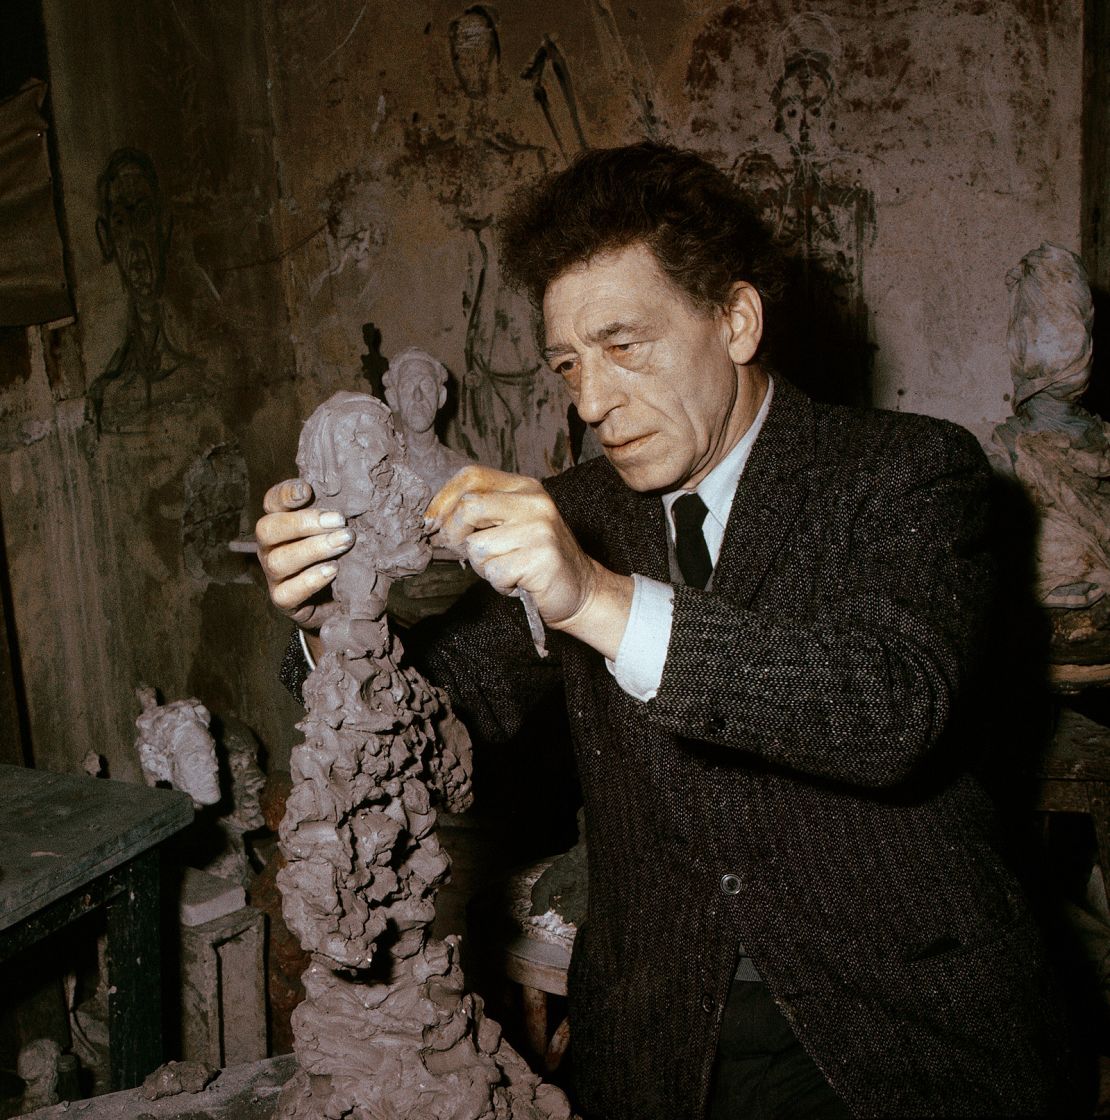 Alberto Giacometti is best known for sculptures of a human figure in plaster or bronze.  